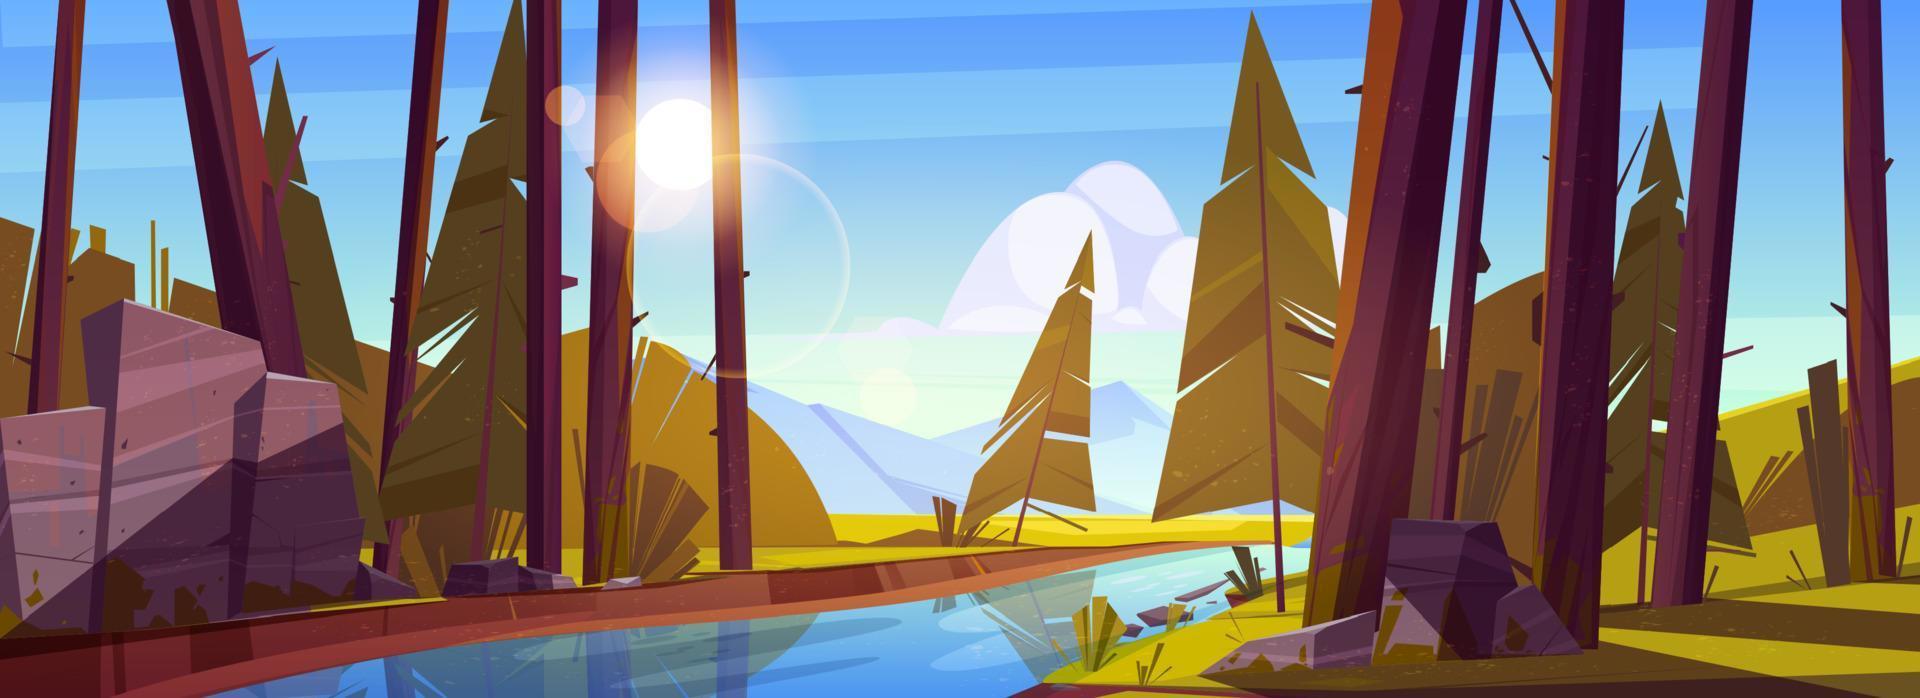 Summer forest with river and mountains vector